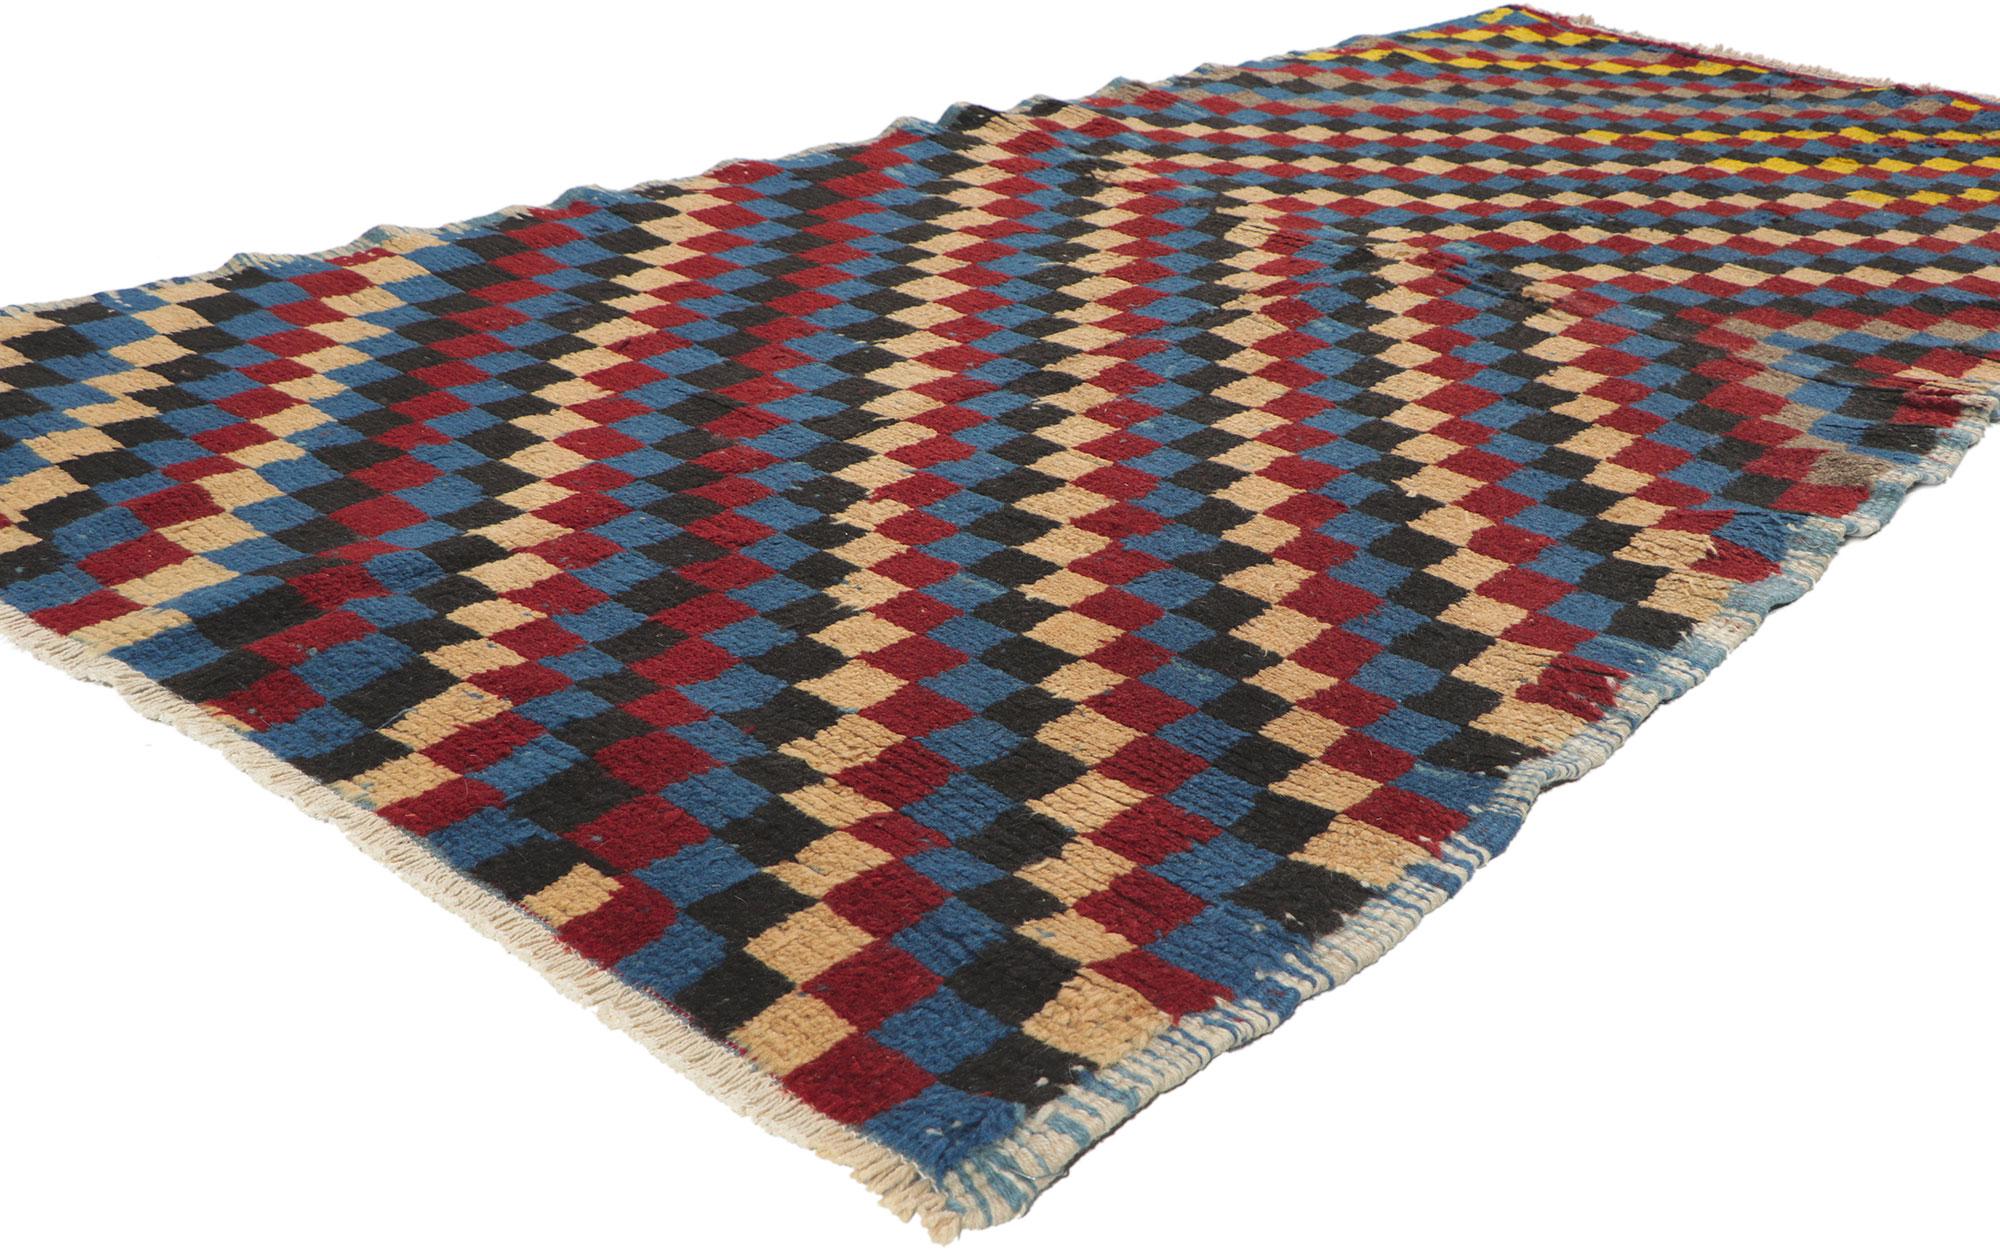 51577 Vintage Turkish Tulu Rug, 03'10 x 08'02. 
Emanating Midcentury Modern style with incredible detail and texture, this hand-knotted vintage Turkish Tulu rug is a captivating vision of woven beauty. Alternating blocks of color combined with the